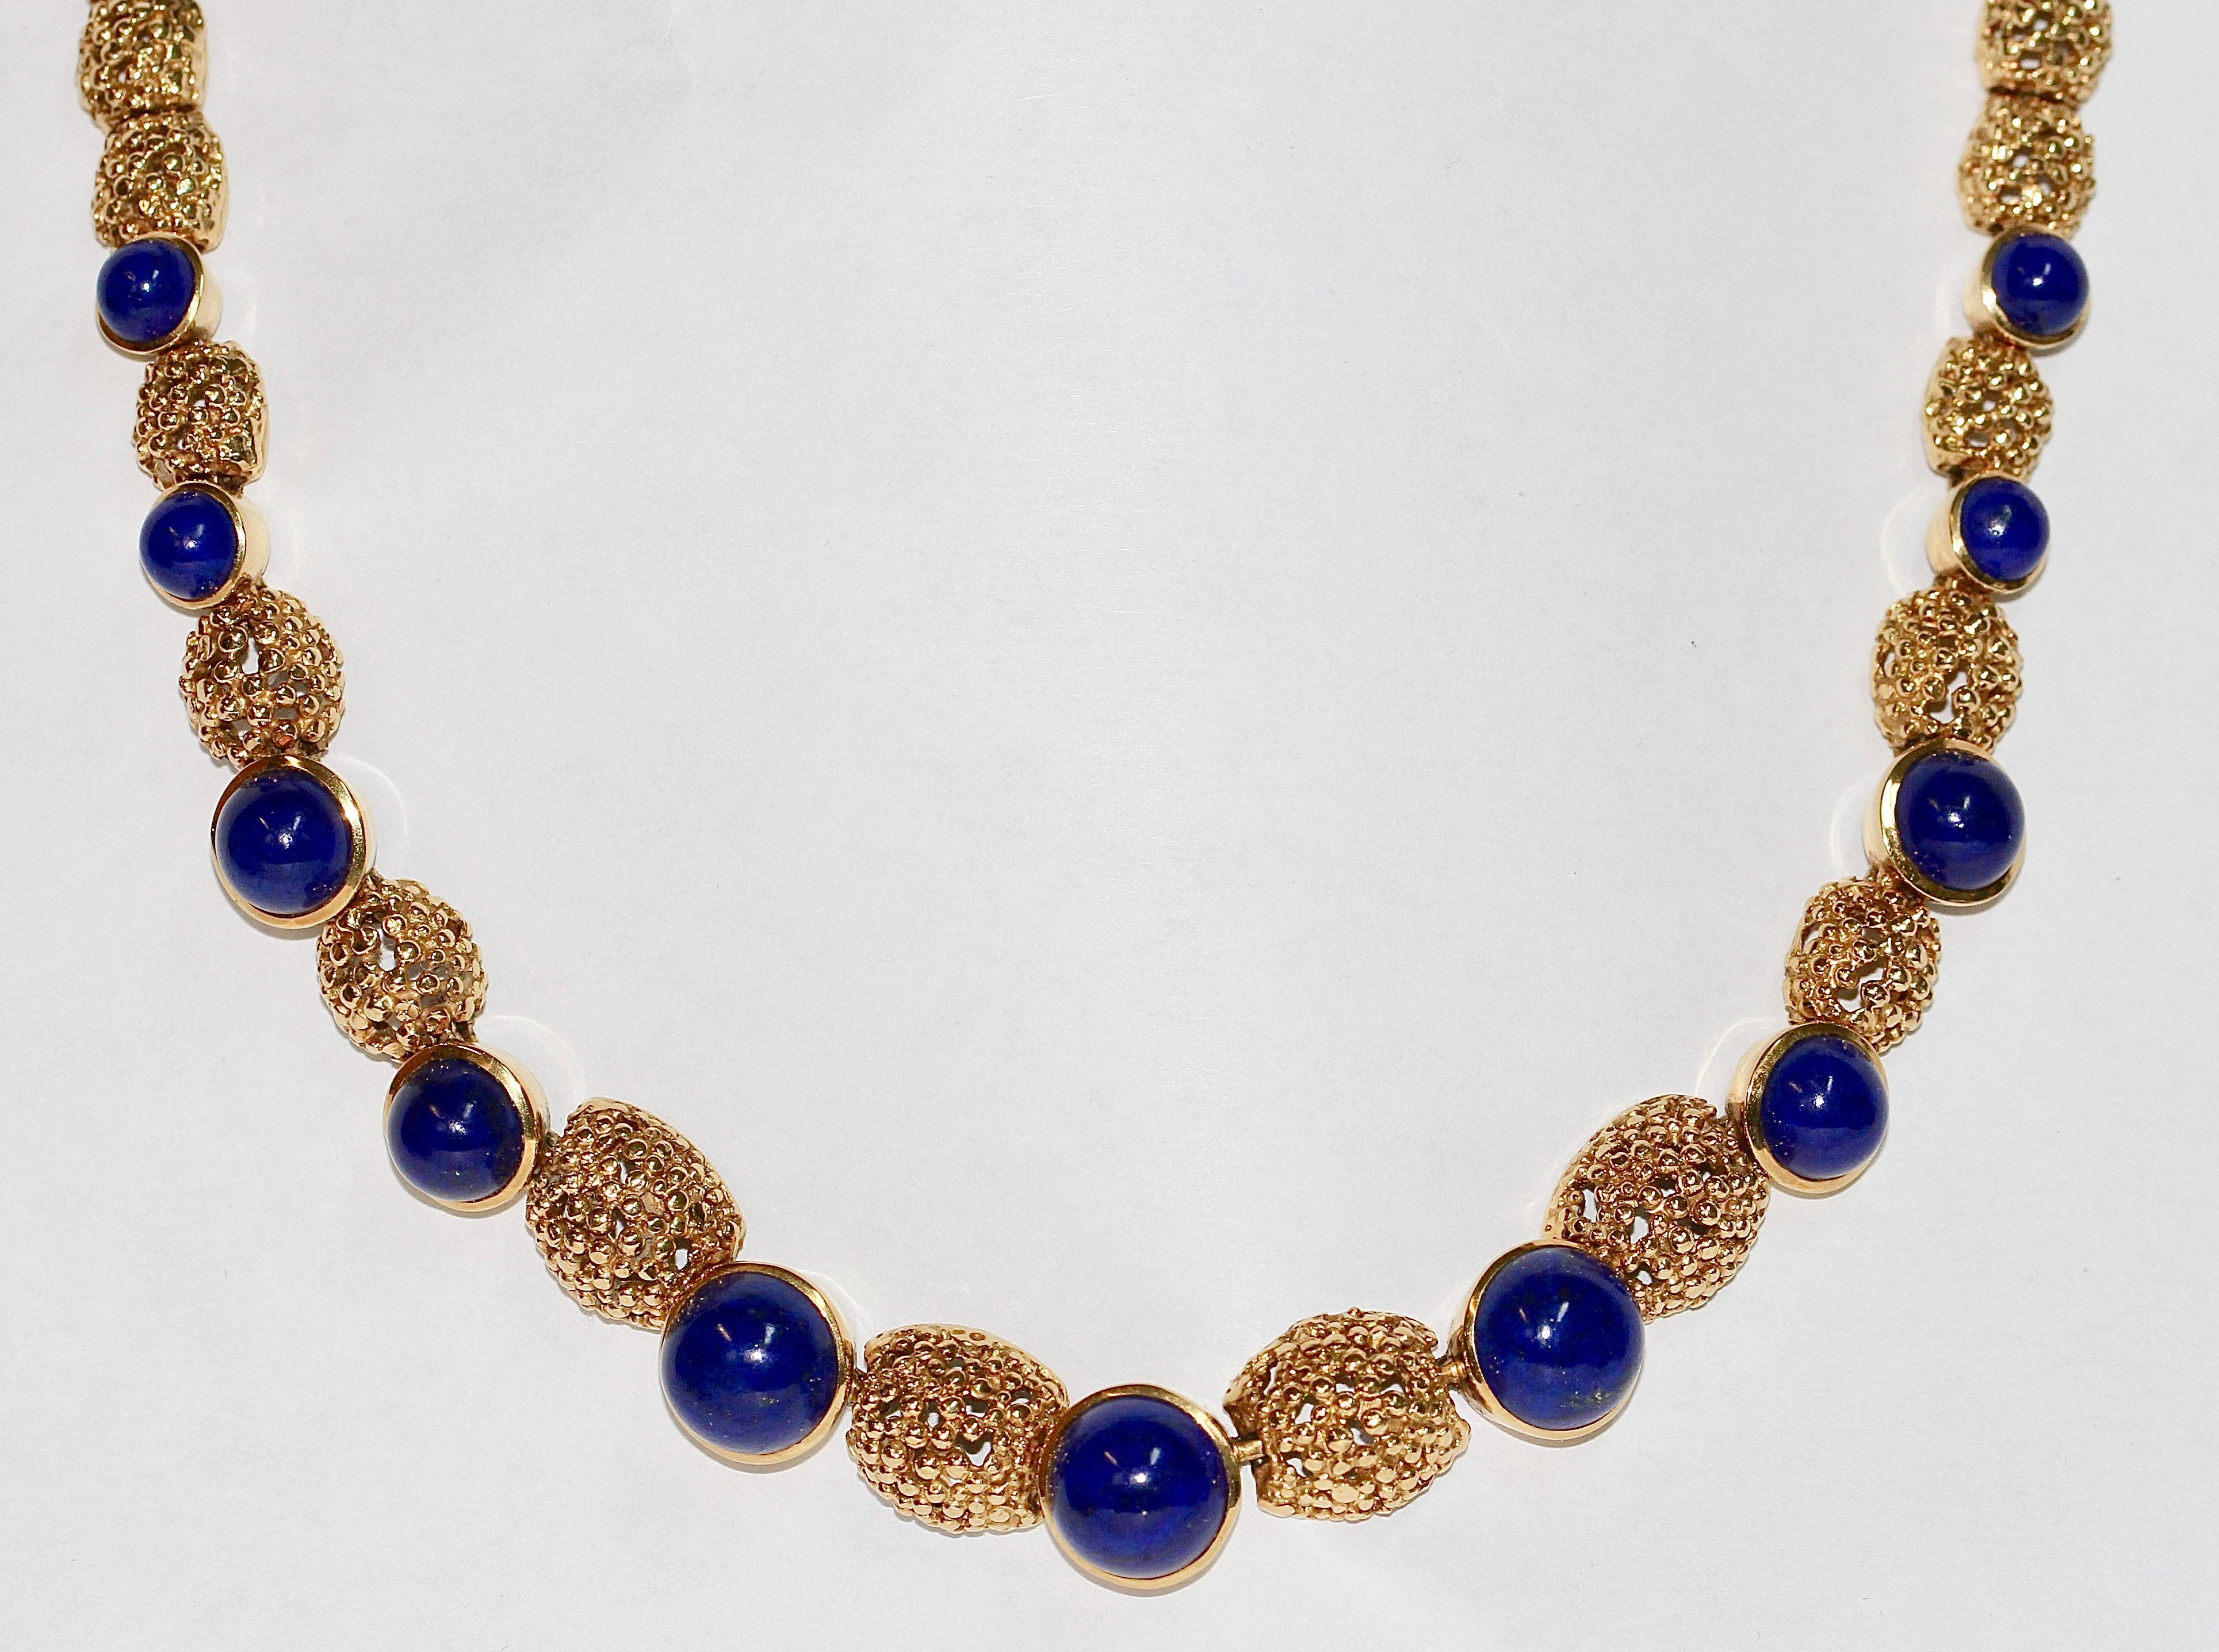 Solid 18 Karat Gold necklace with lapis lazuli.

We also offer the matching bracelet. Look in our other articles.